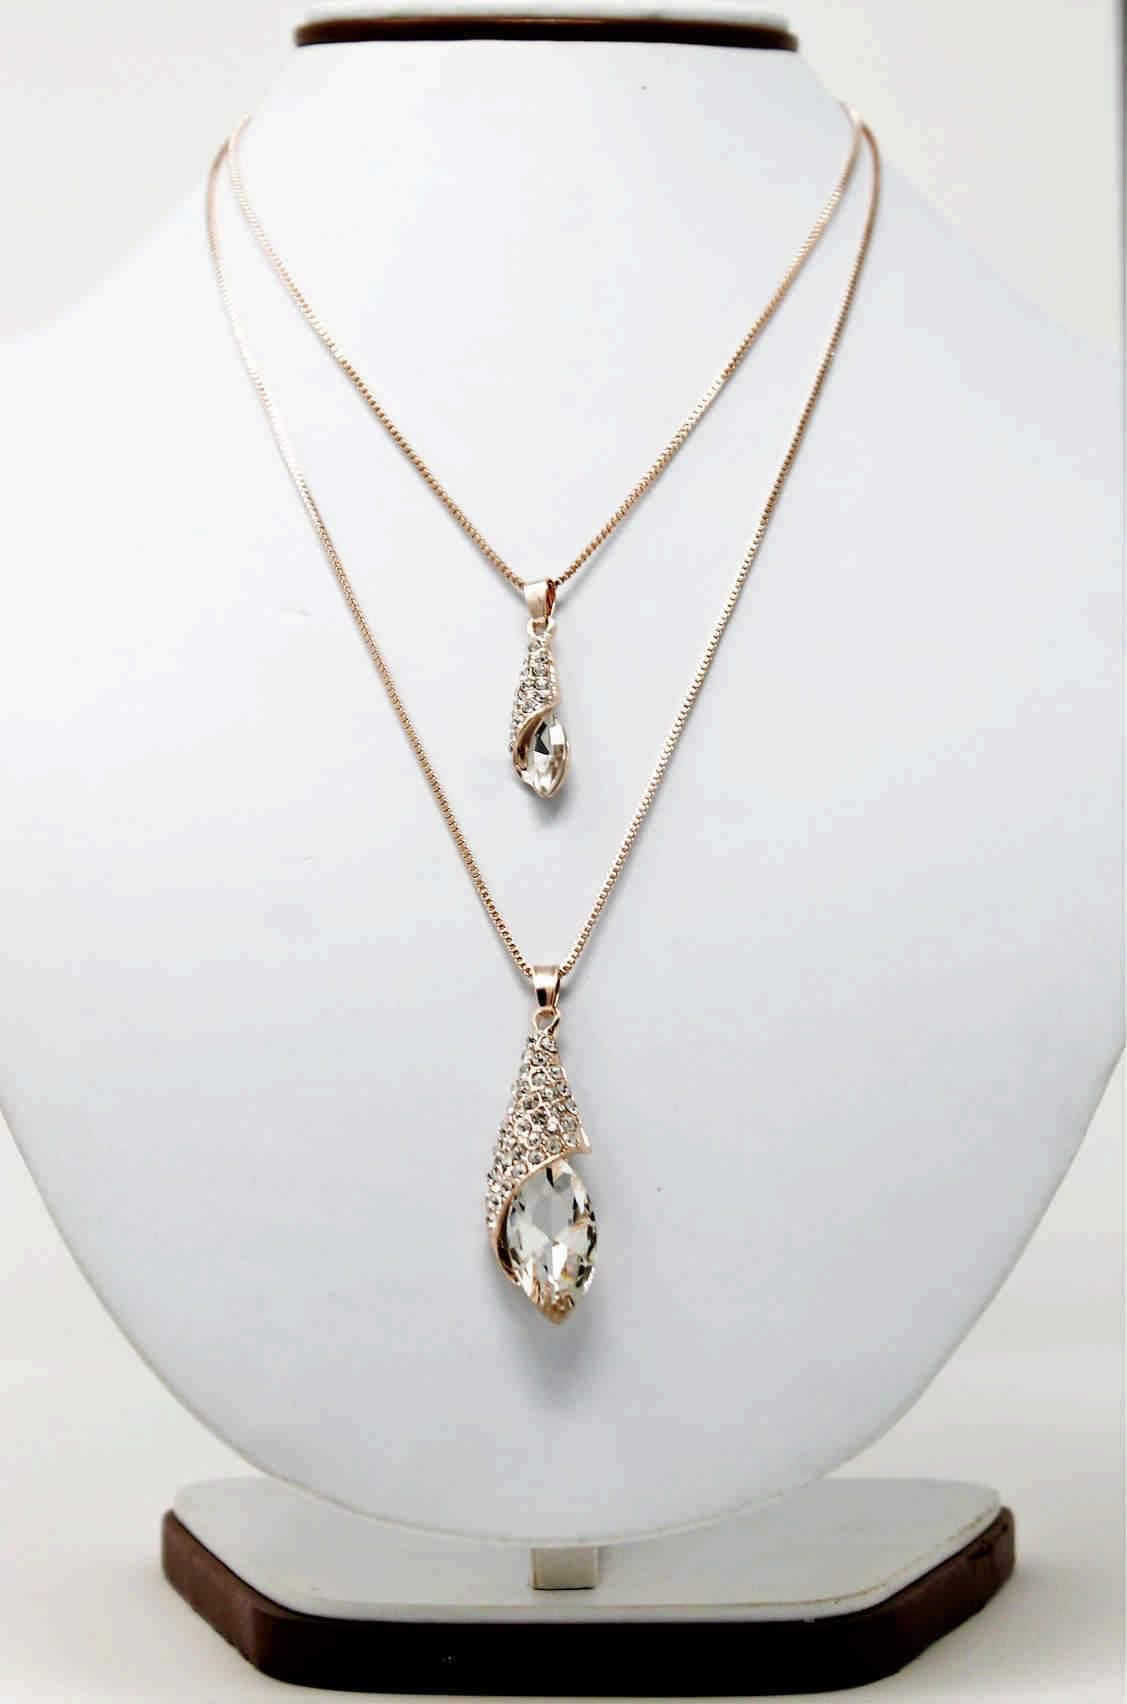 Drop Style Rhinestones Studded Design Imitation Fashion Metal Double Pendant with Long Chain, Gold (Neck View)